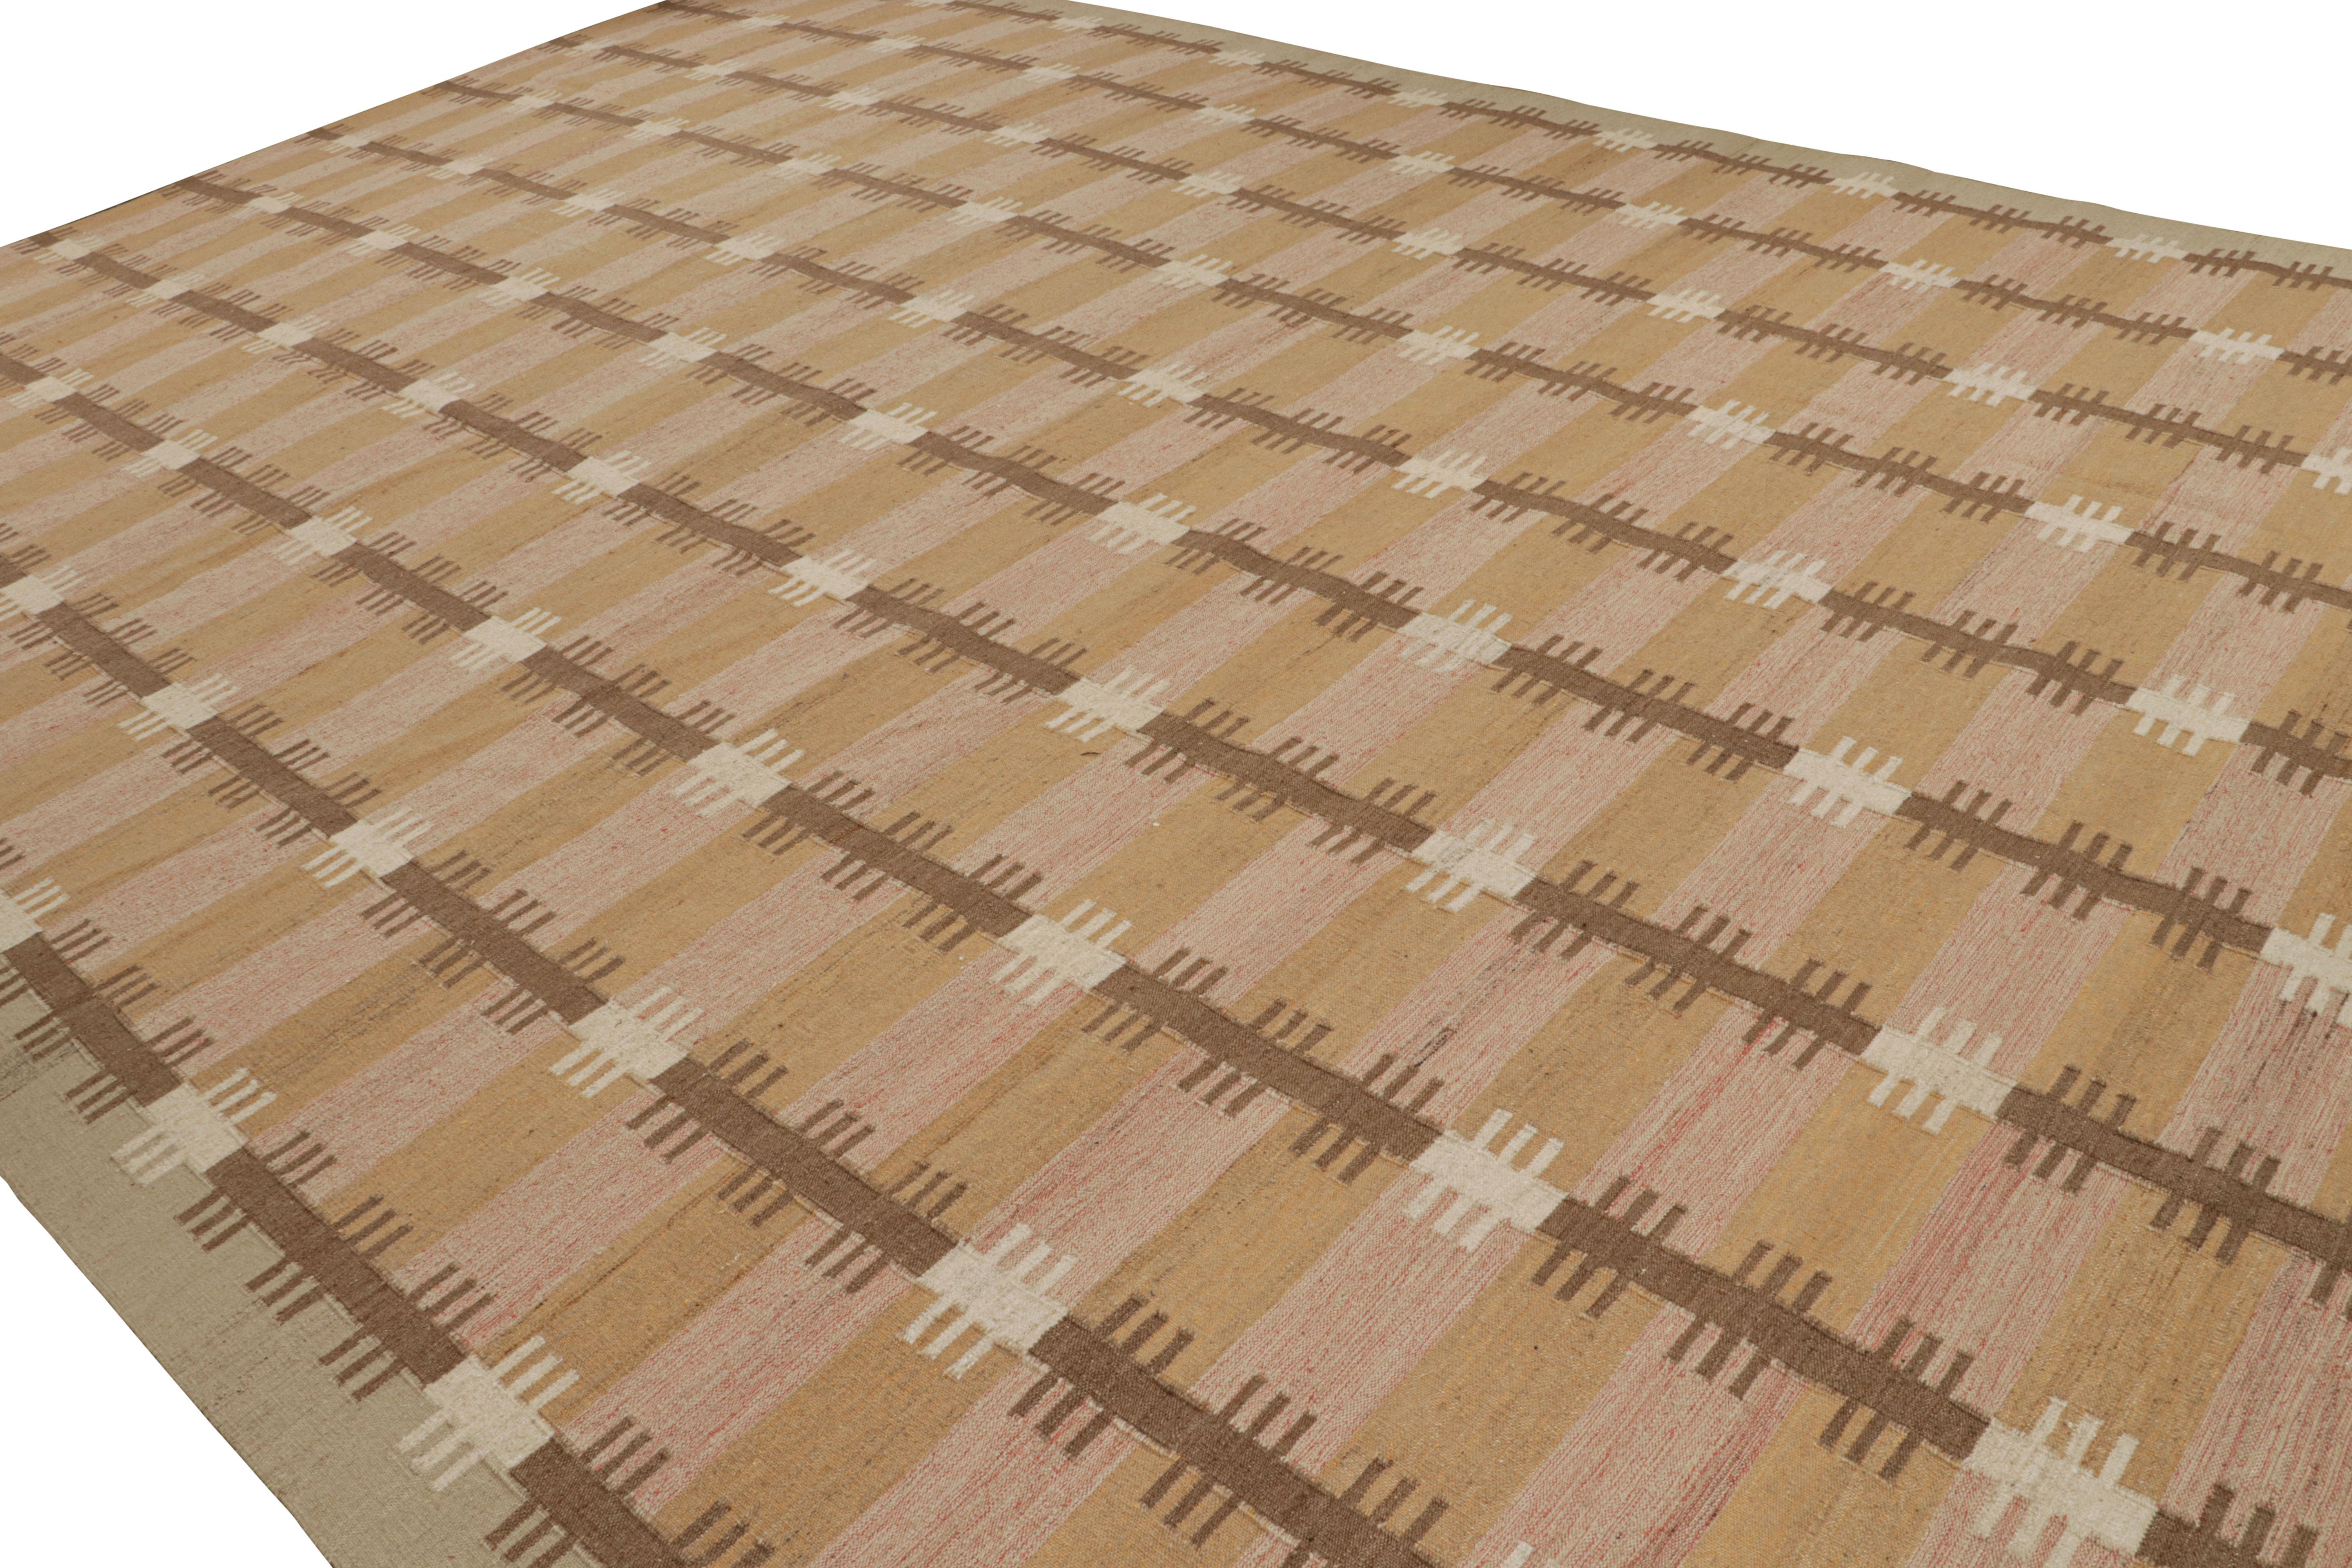 Hand-knotted in semi-worsted wool, this 13x19 finer weave Scandinavian flat weave features pink, beige-brown and gold tones underscore geometric patterns inspired by the Swedish minimalist style. 

On the design: 

Admirers of the craft may admire